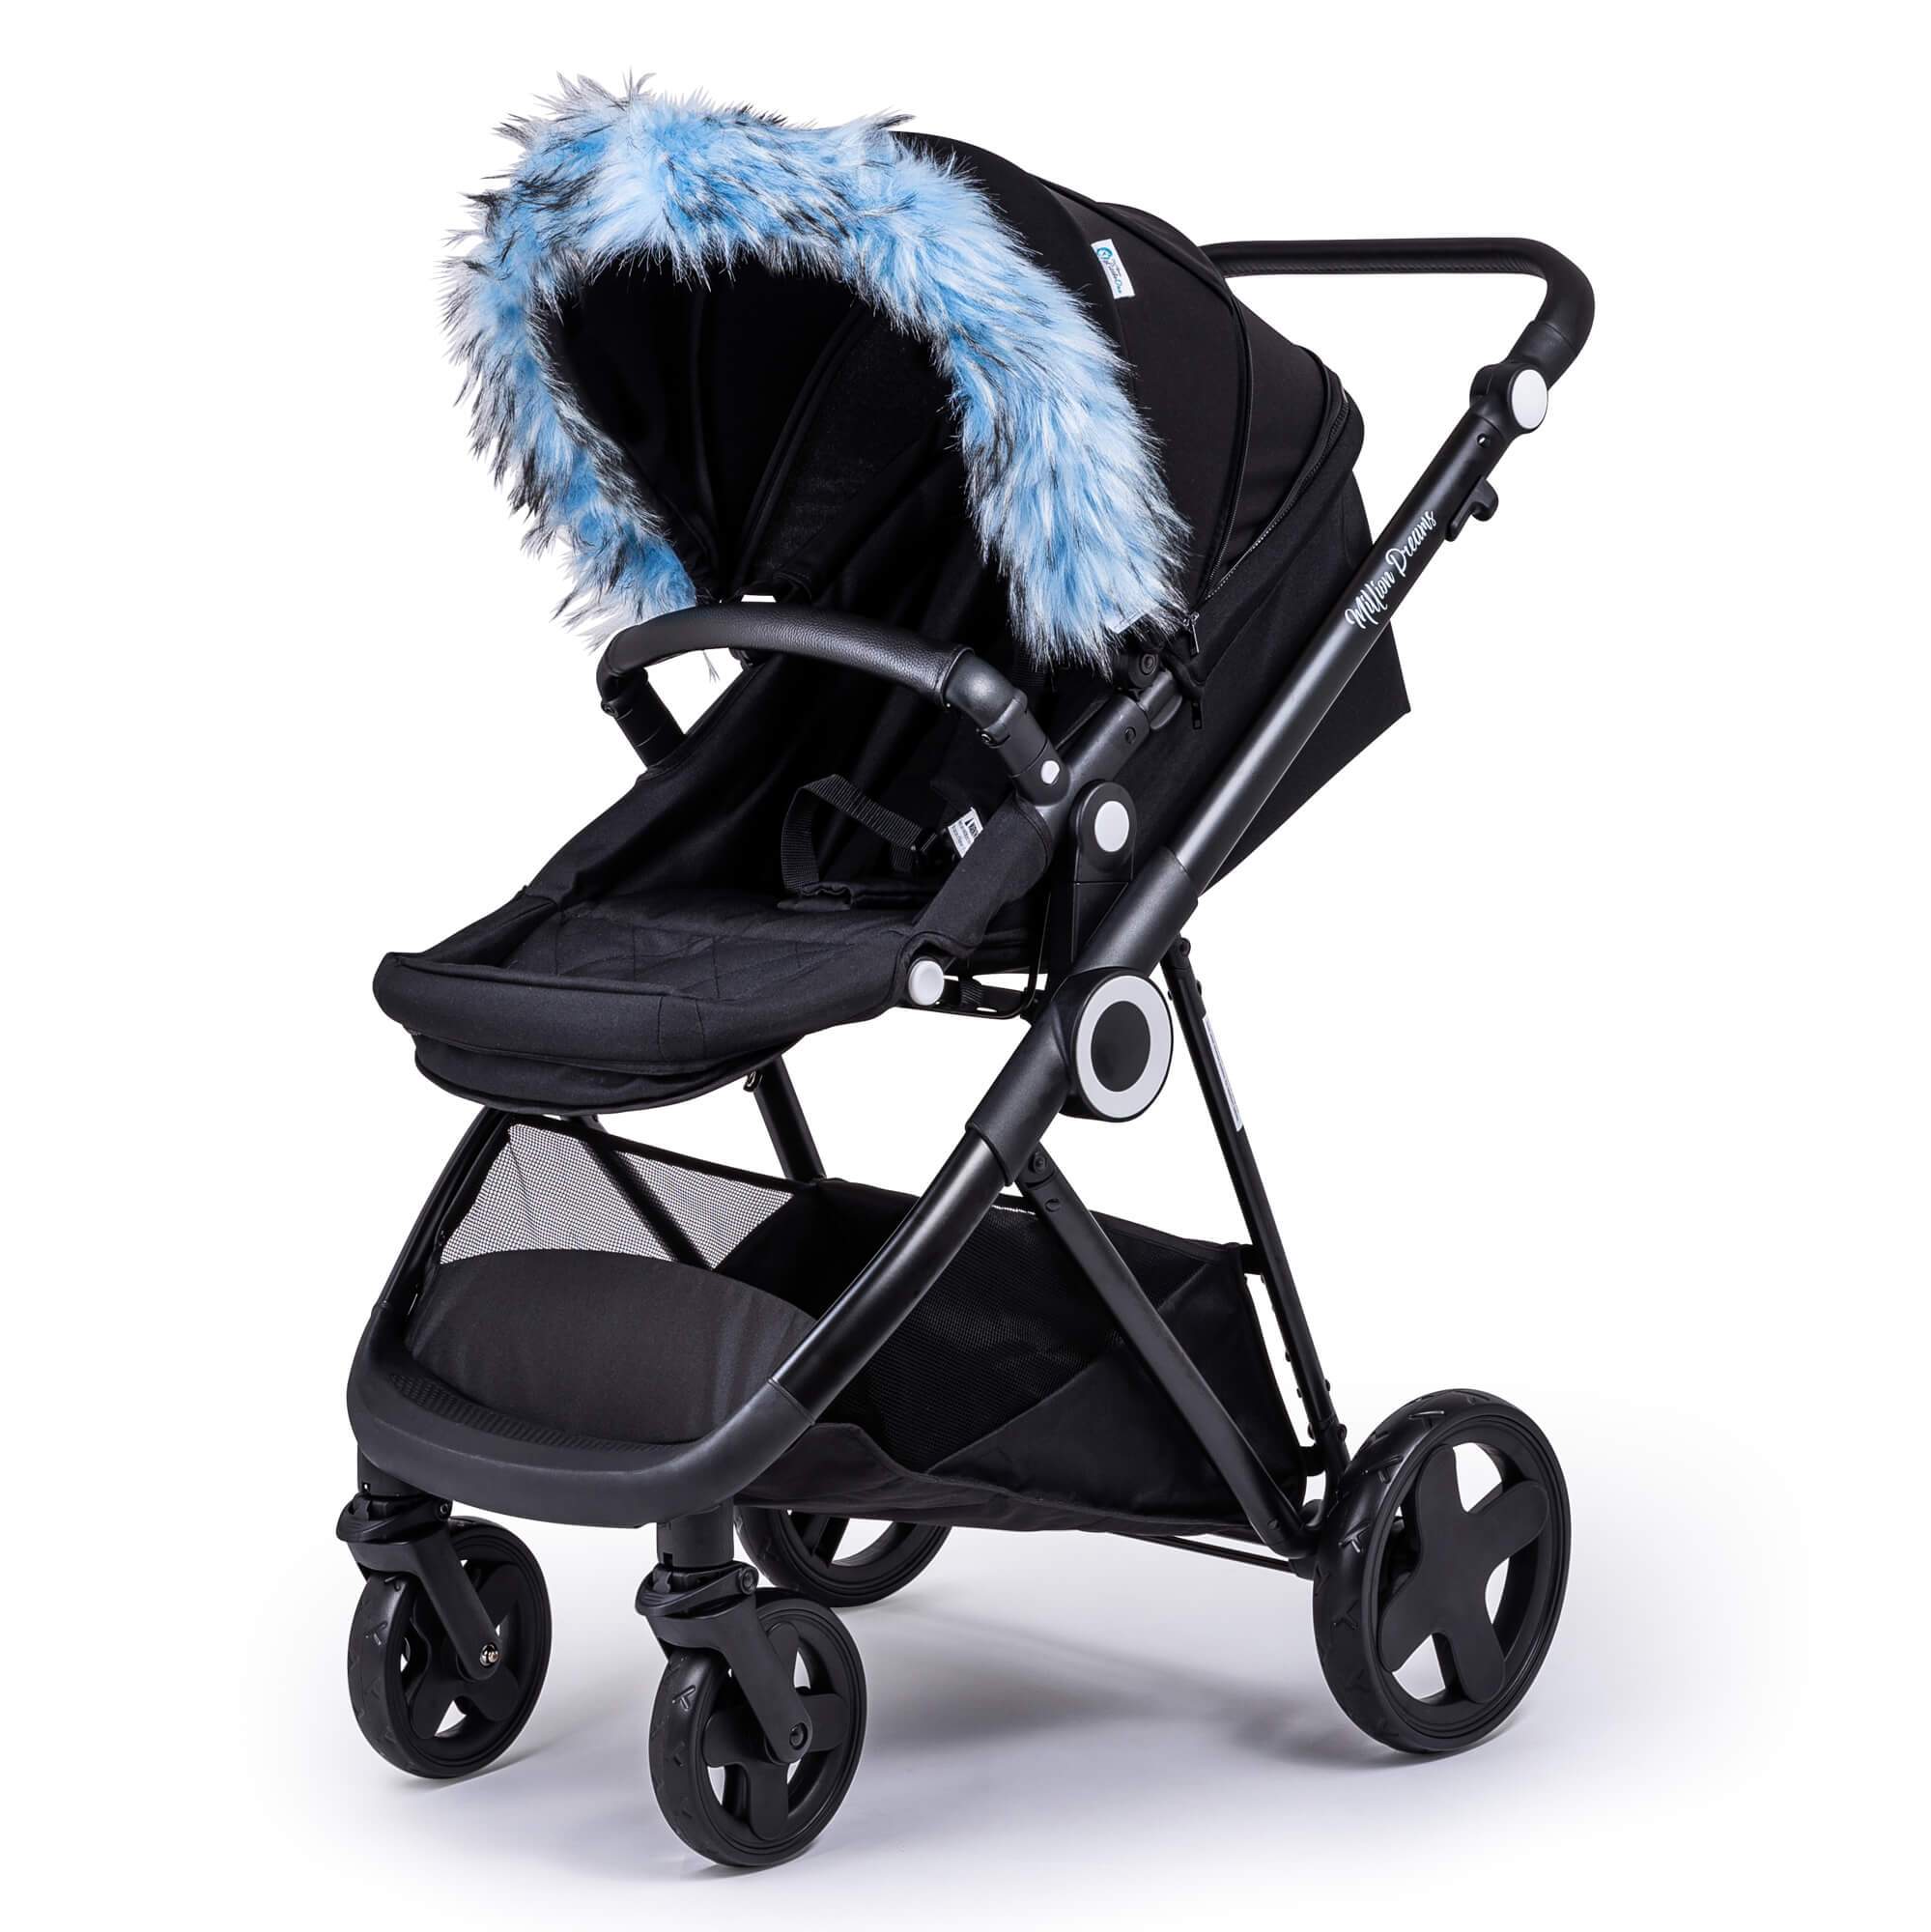 Pram Fur Hood Trim Attachment for Pushchair Compatible with NeoNato - Light Blue / Fits All Models | For Your Little One